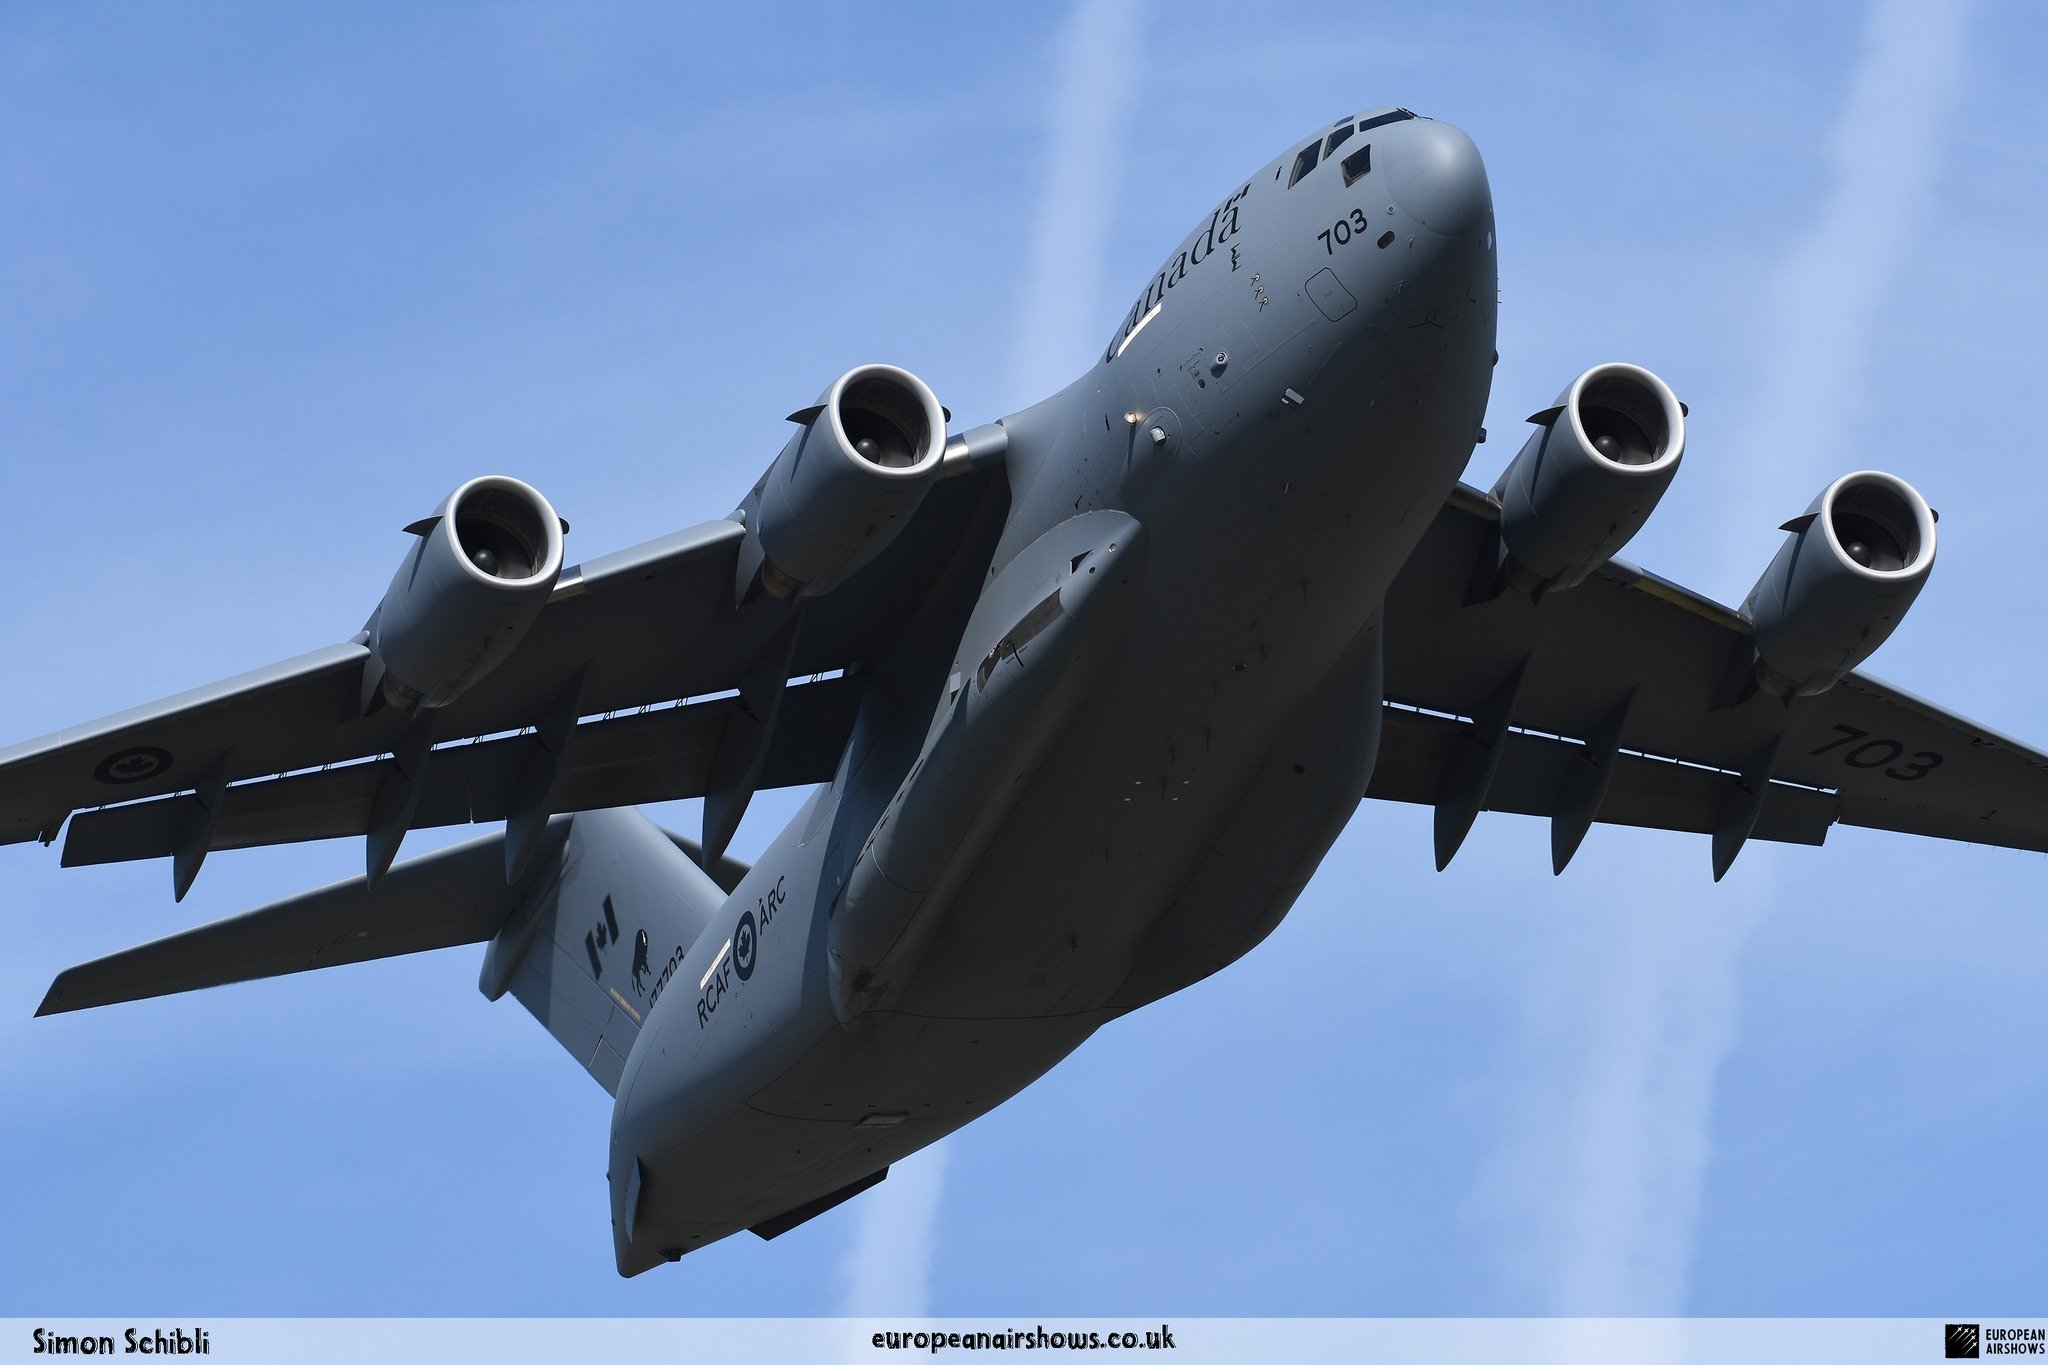 𝐀𝐈𝐑𝐒𝐇𝐎𝐖 𝐍𝐄𝐖𝐒: A very Candian RIAT Update today! Following last week's CC-295 update, the RCAF has now confirmed that they will be sending CC-177 Globemaster III, CC-130J Hercules, and CC-150T Polaris for static display. Furthermore, severa